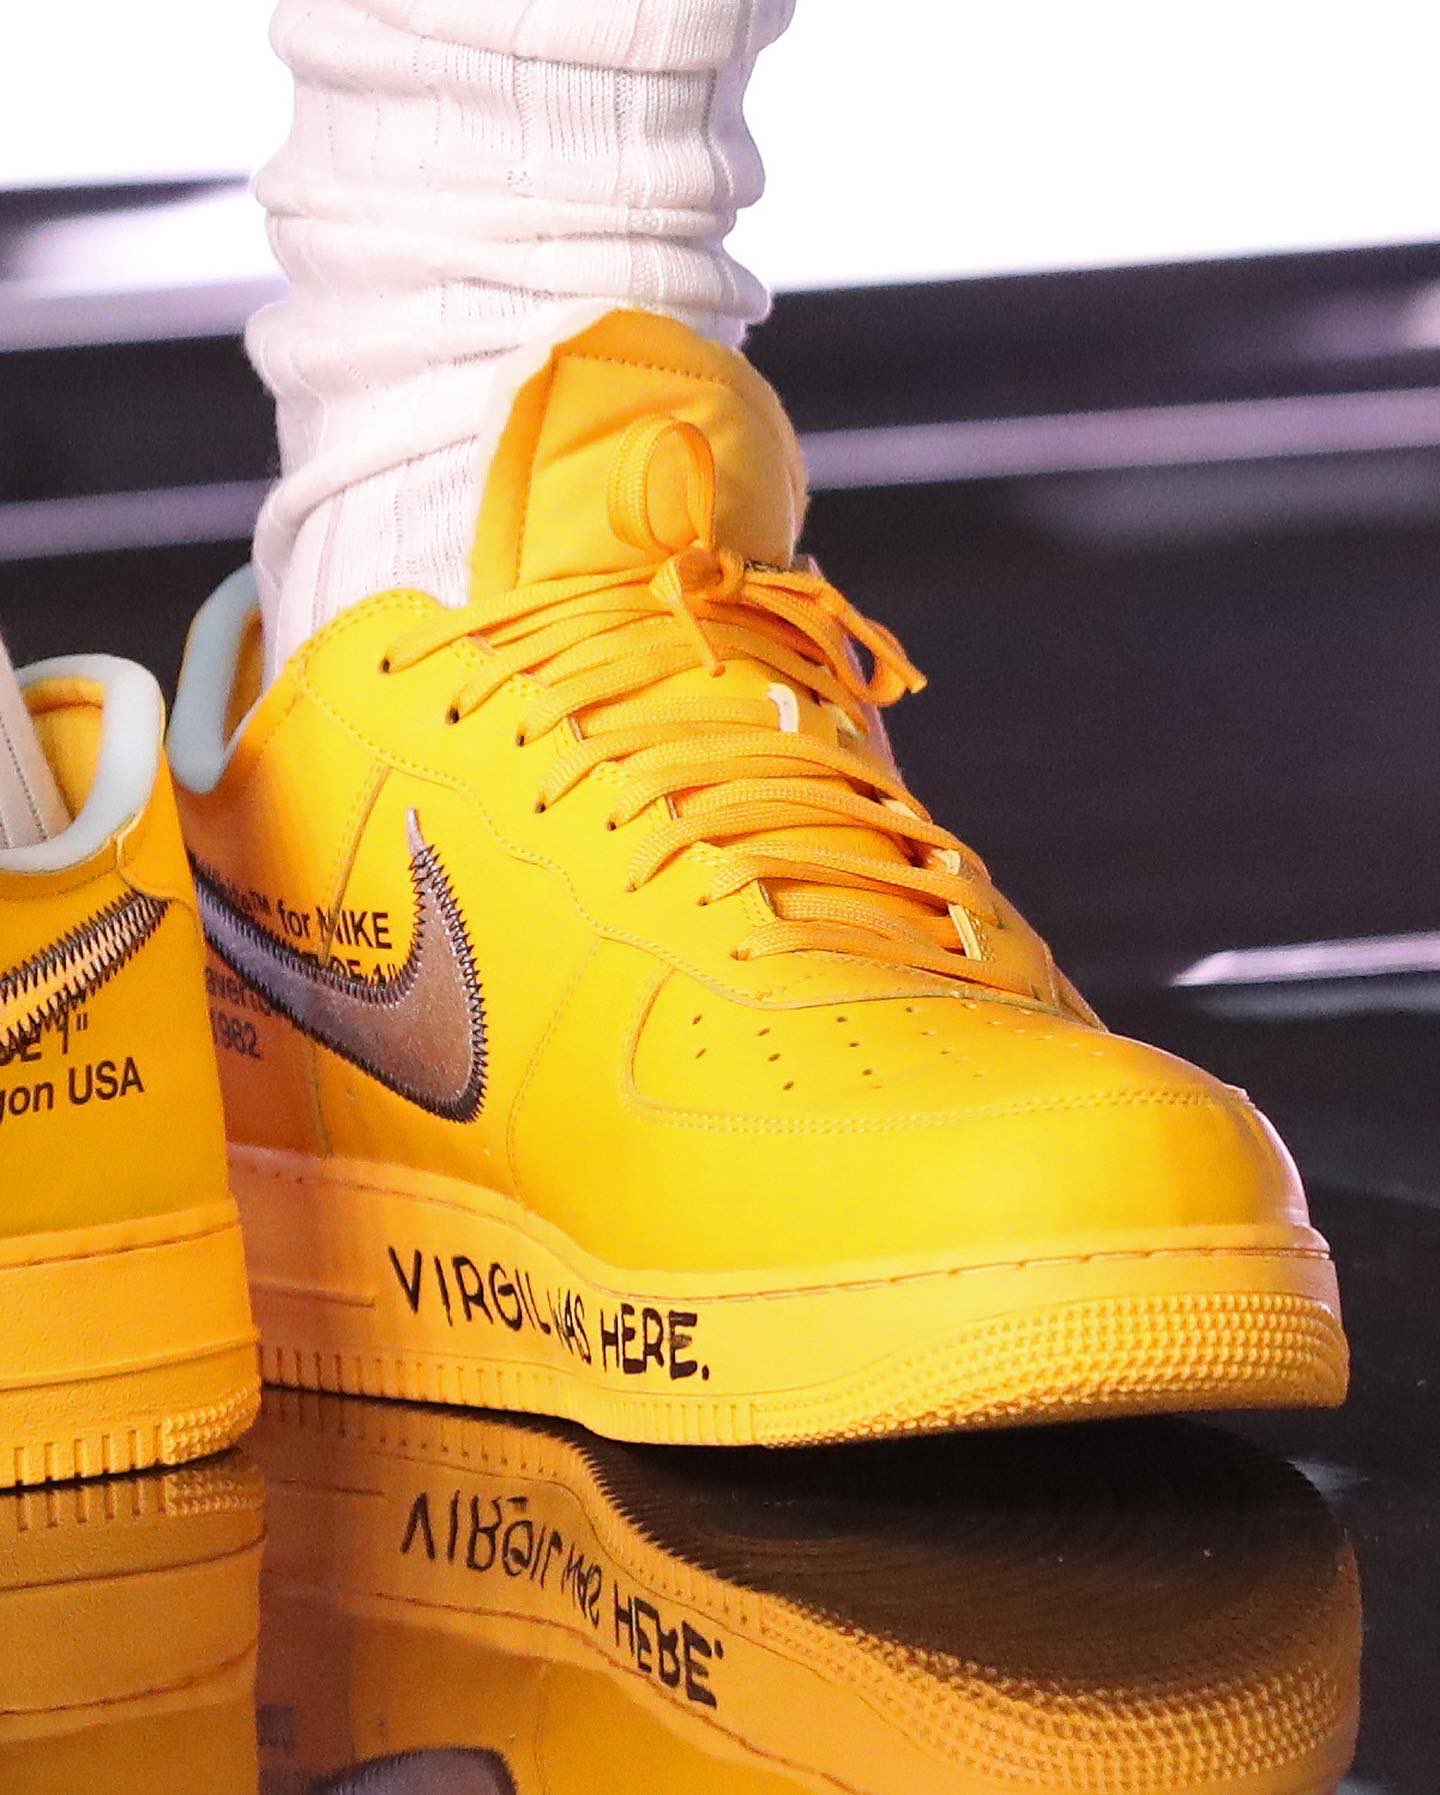 First Look at the Off-White x Nike Air Force 1 “University Gold”